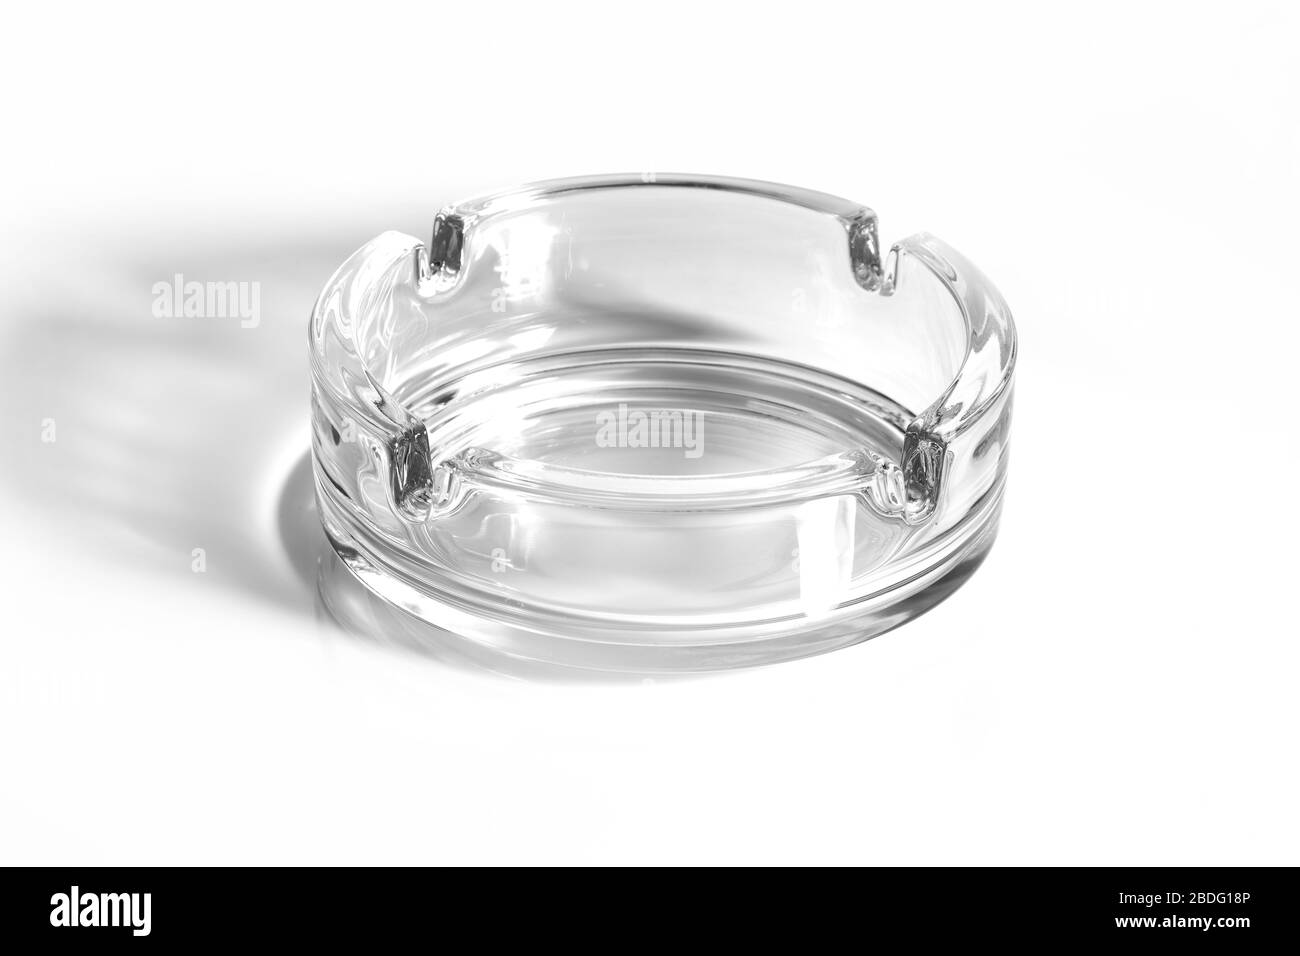 A glass ash tray on white background with shadow Stock Photo